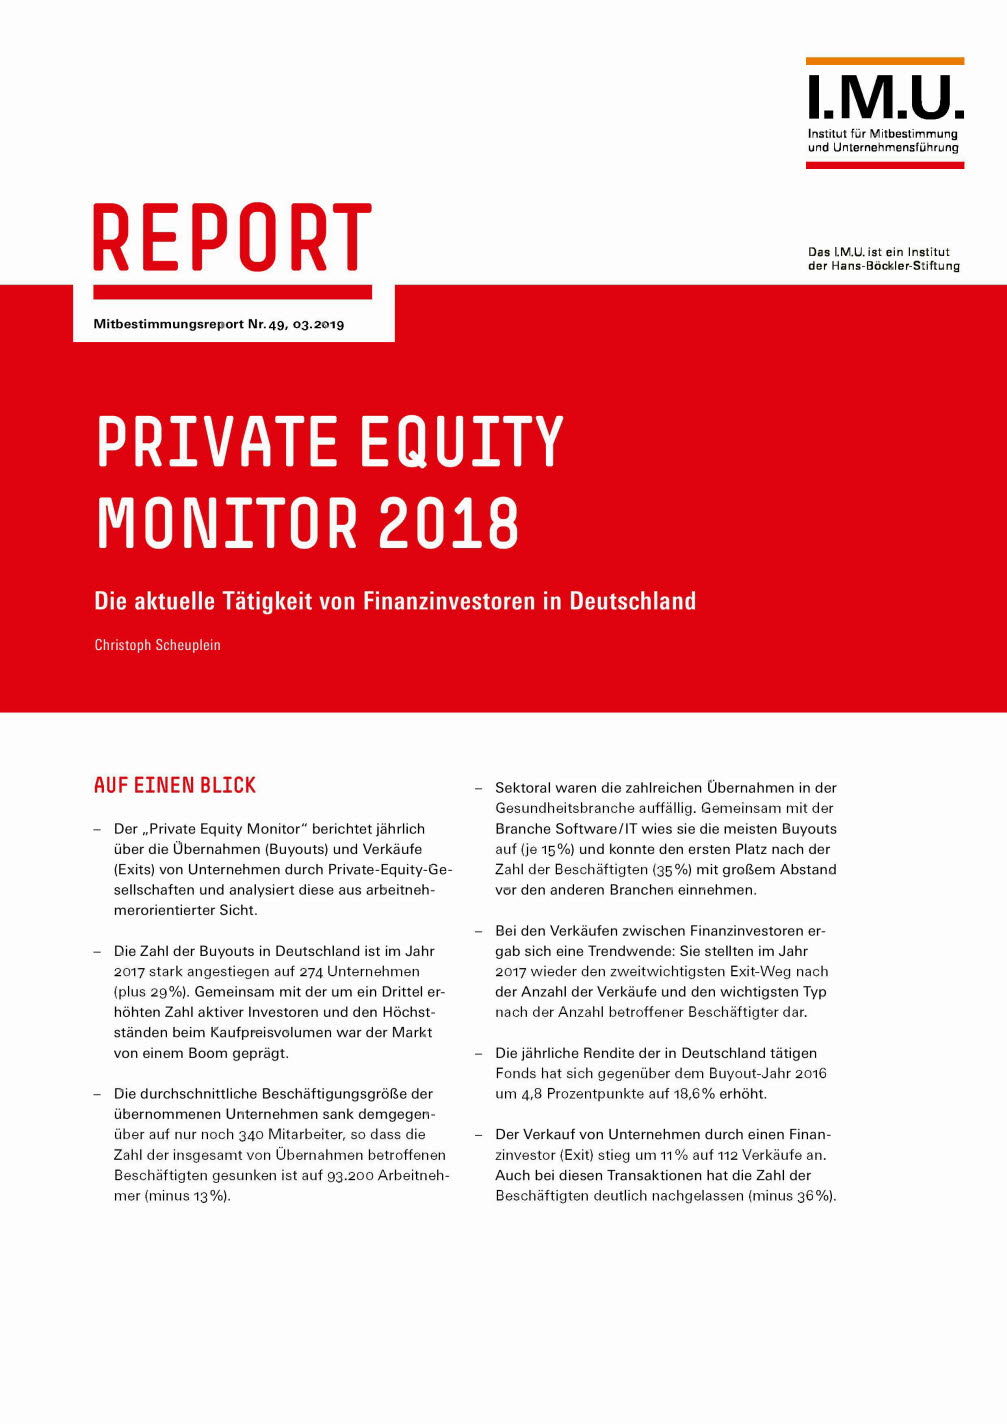 Private Equity Monitor 2018